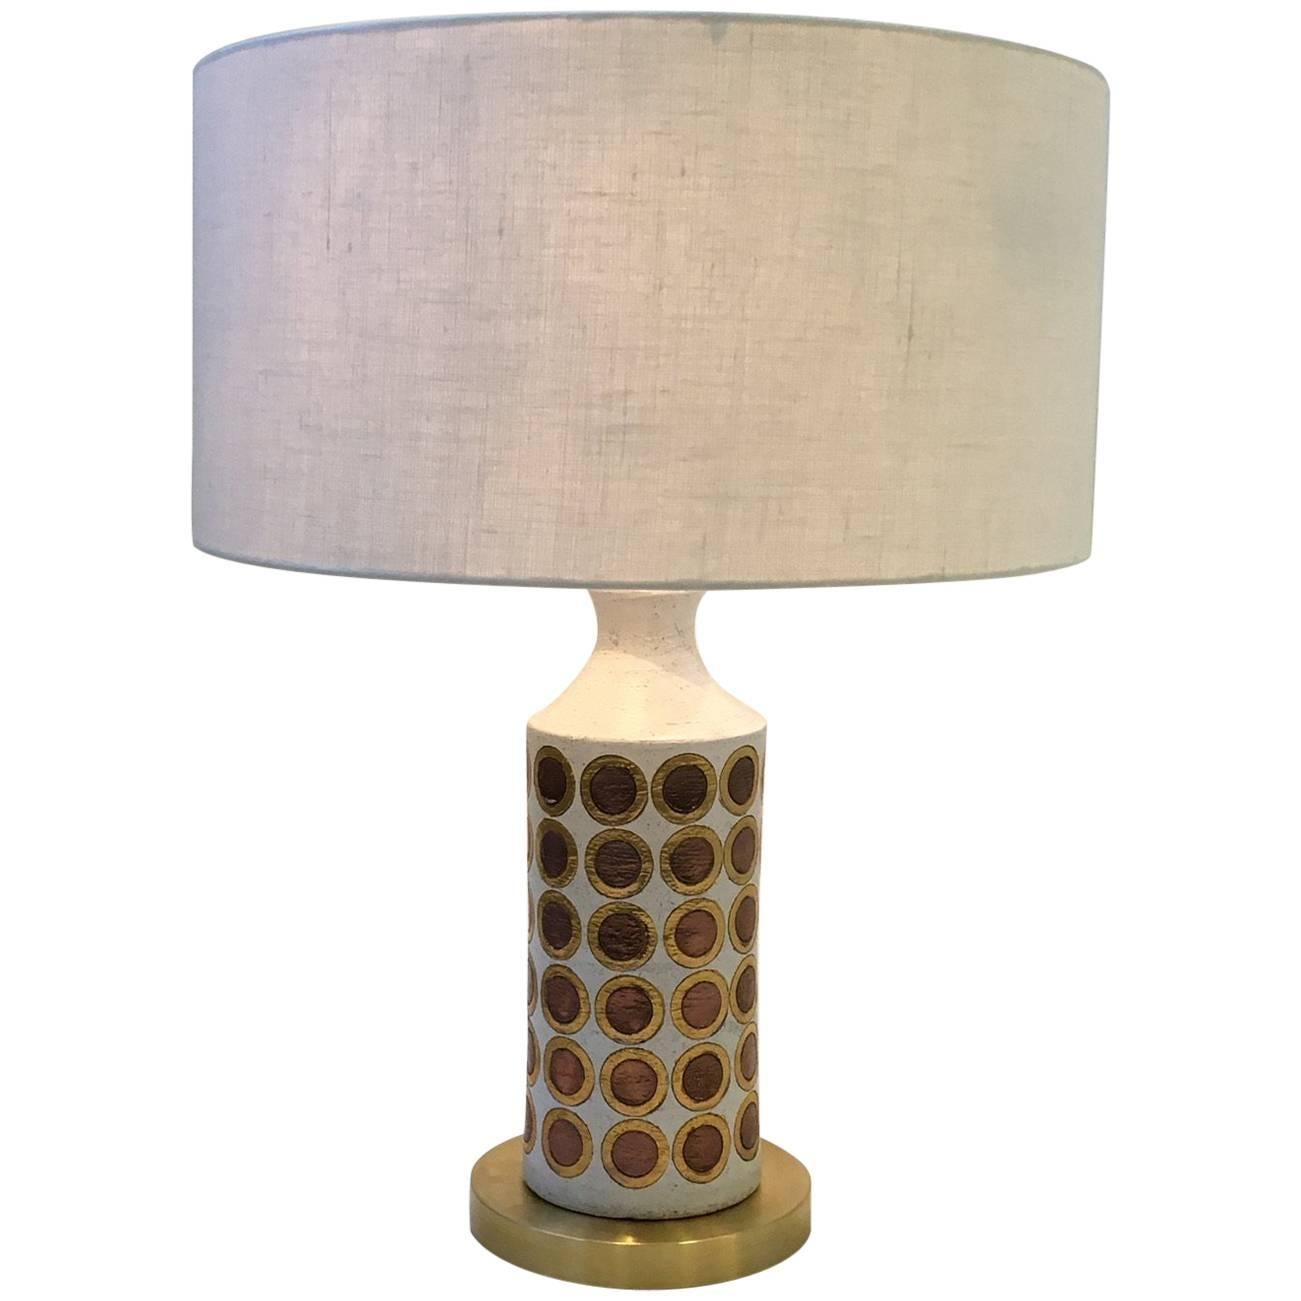 Italian Ceramic and Brass Table Lamp by Bitossi For Sale